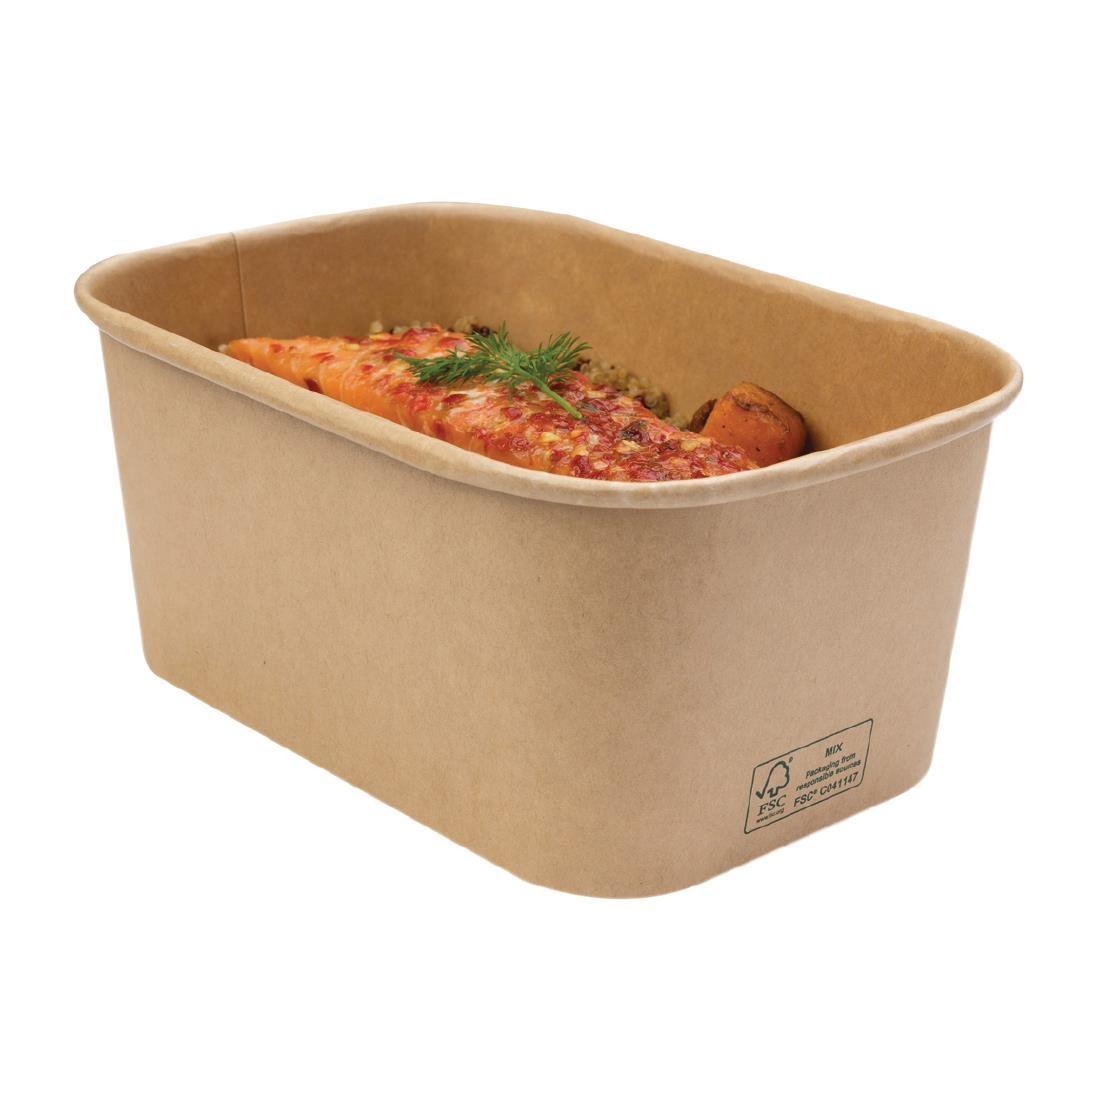 Colpac Stagione Recyclable Microwavable Food Boxes 1Ltr / 35oz (Pack of 300) - FP459  - 2